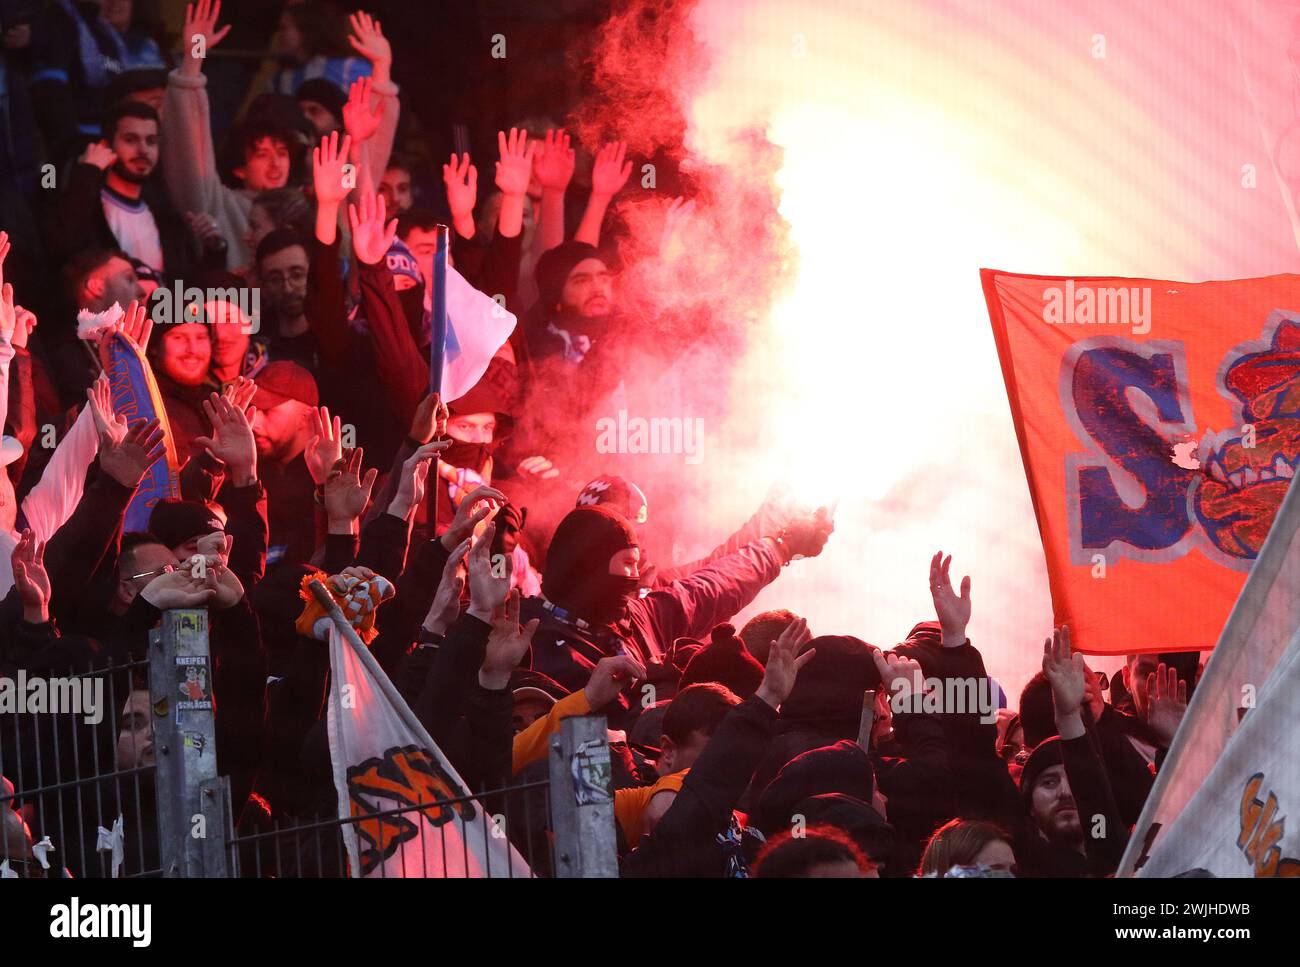 Hamburg, Germany - February 15, 2024: Marseille supporters burn flares and show their support during the UEFA Europa League game against Shakhtar Donetsk at Volksparkstadion in Hamburg, Germany Stock Photo